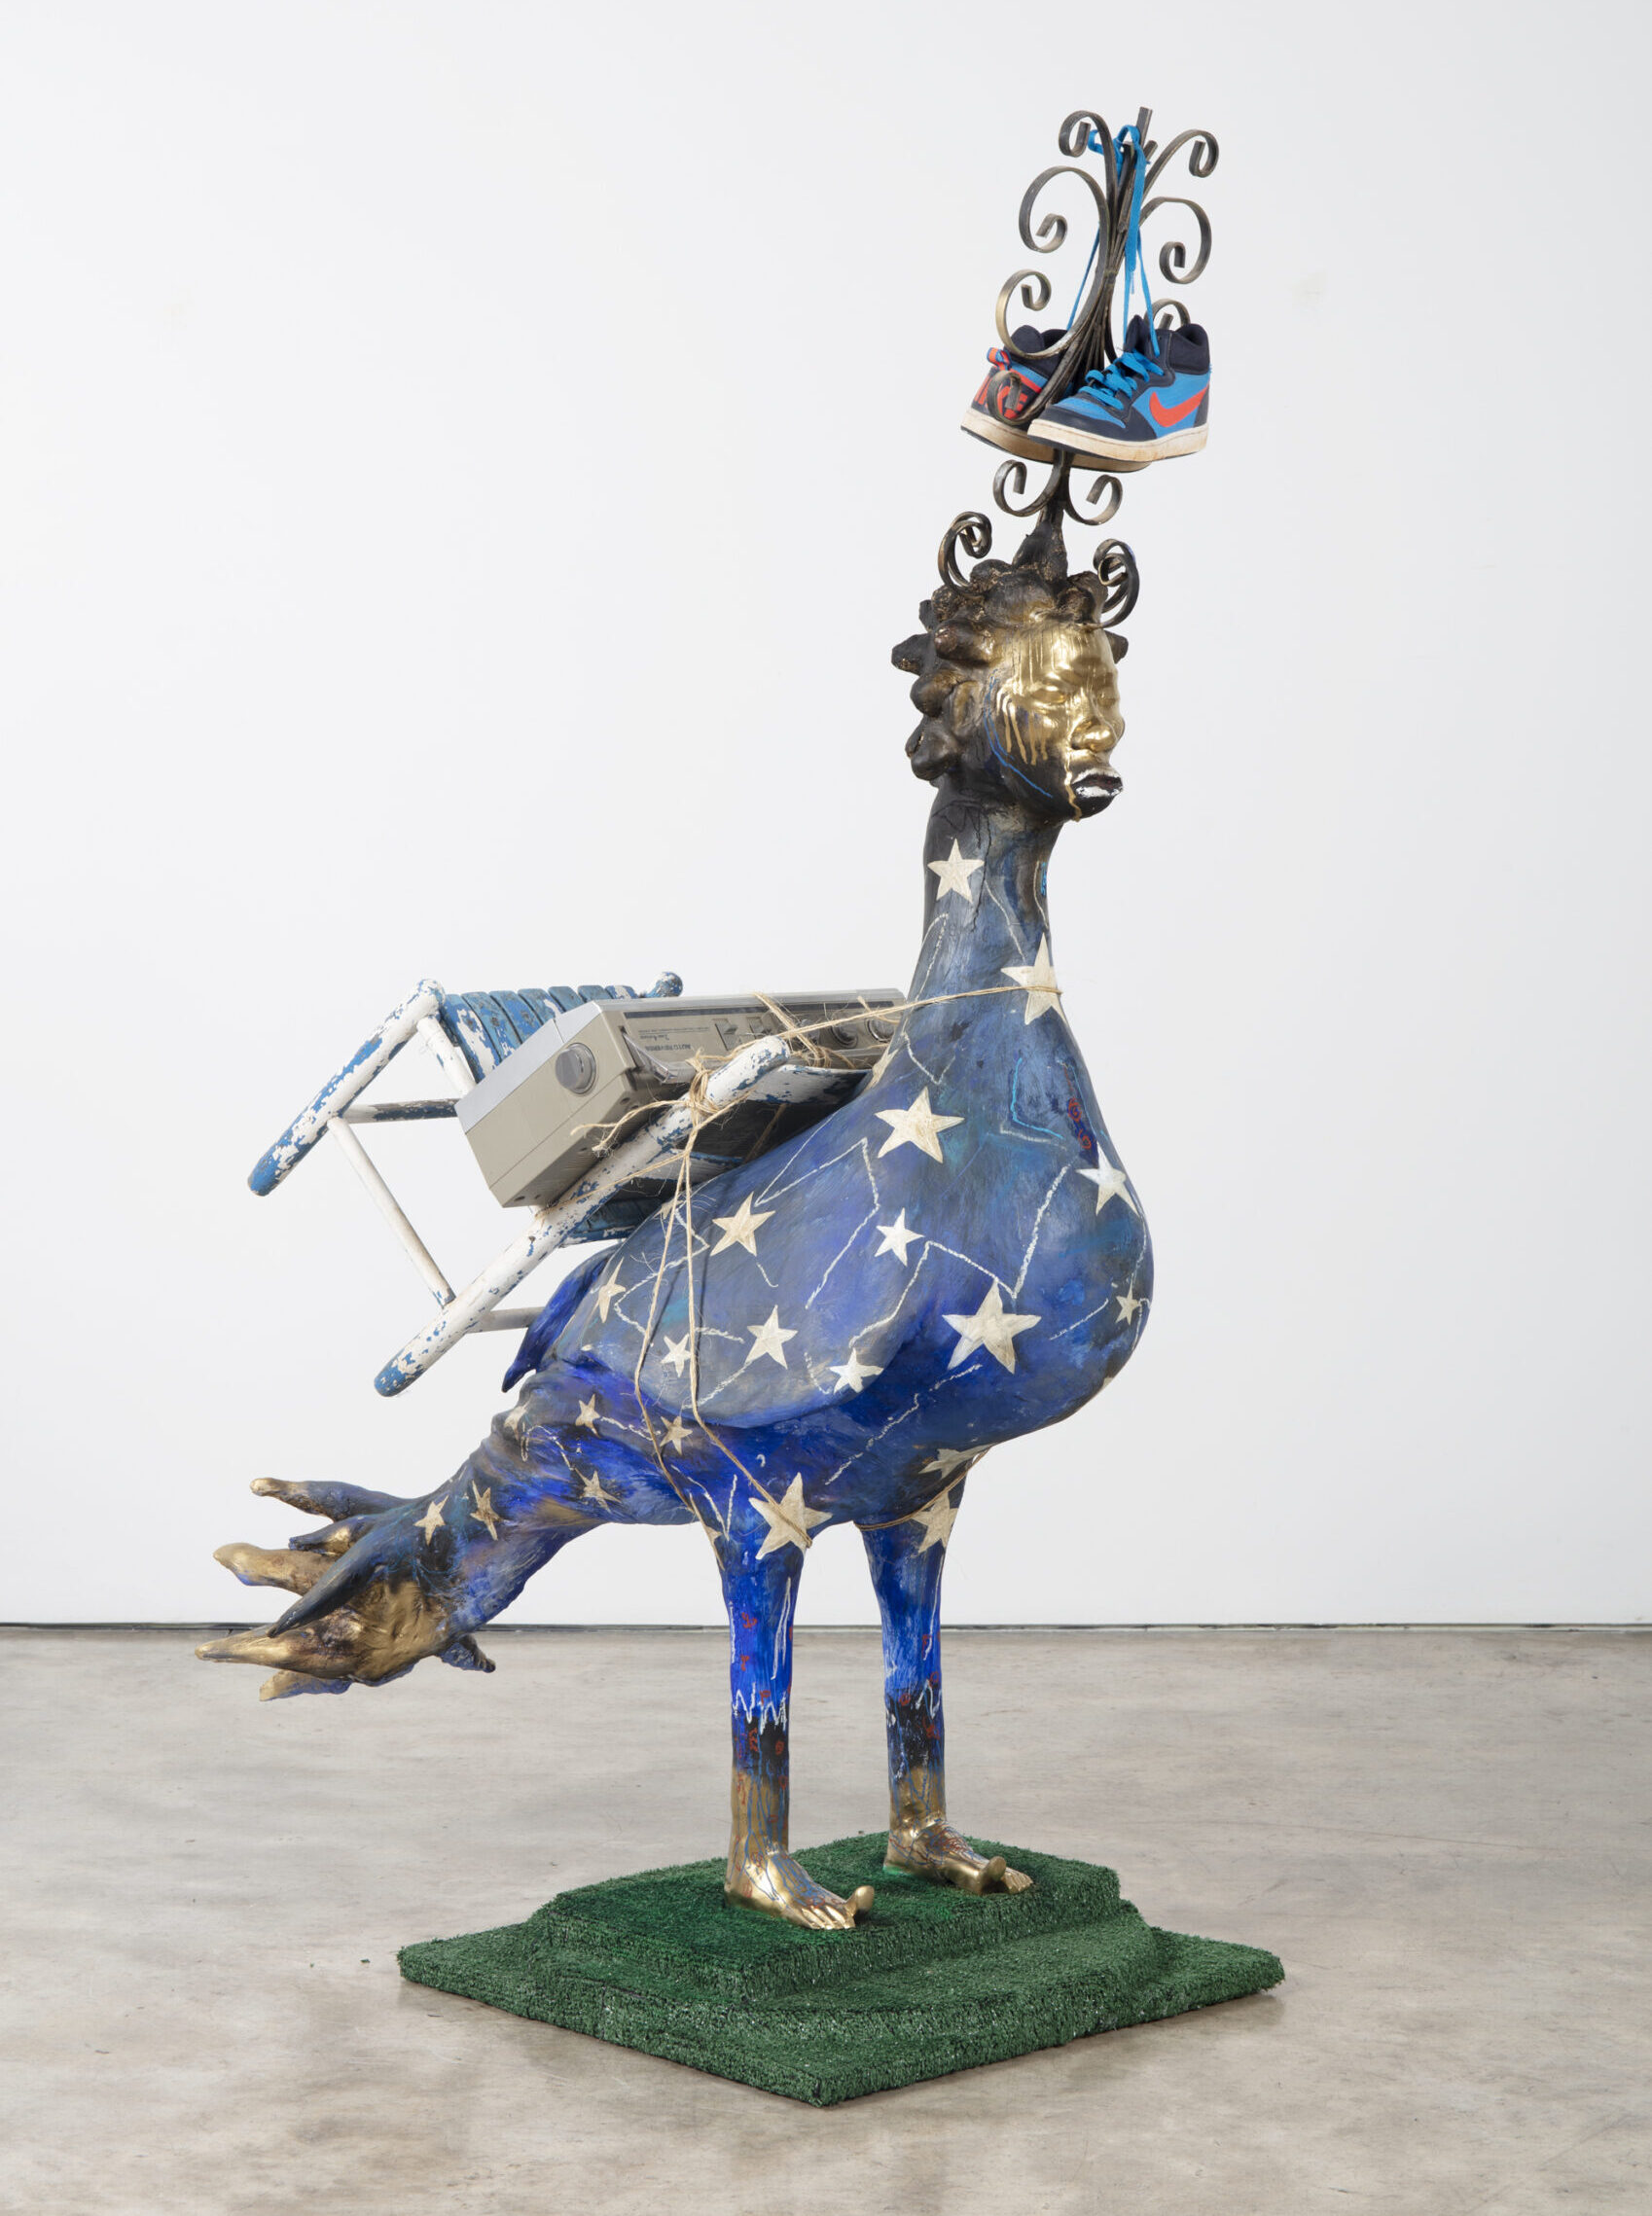 A mixed-media sculpture of a bird-like creature with Nike shoes on its head and a chair with an air conditioner on its back.